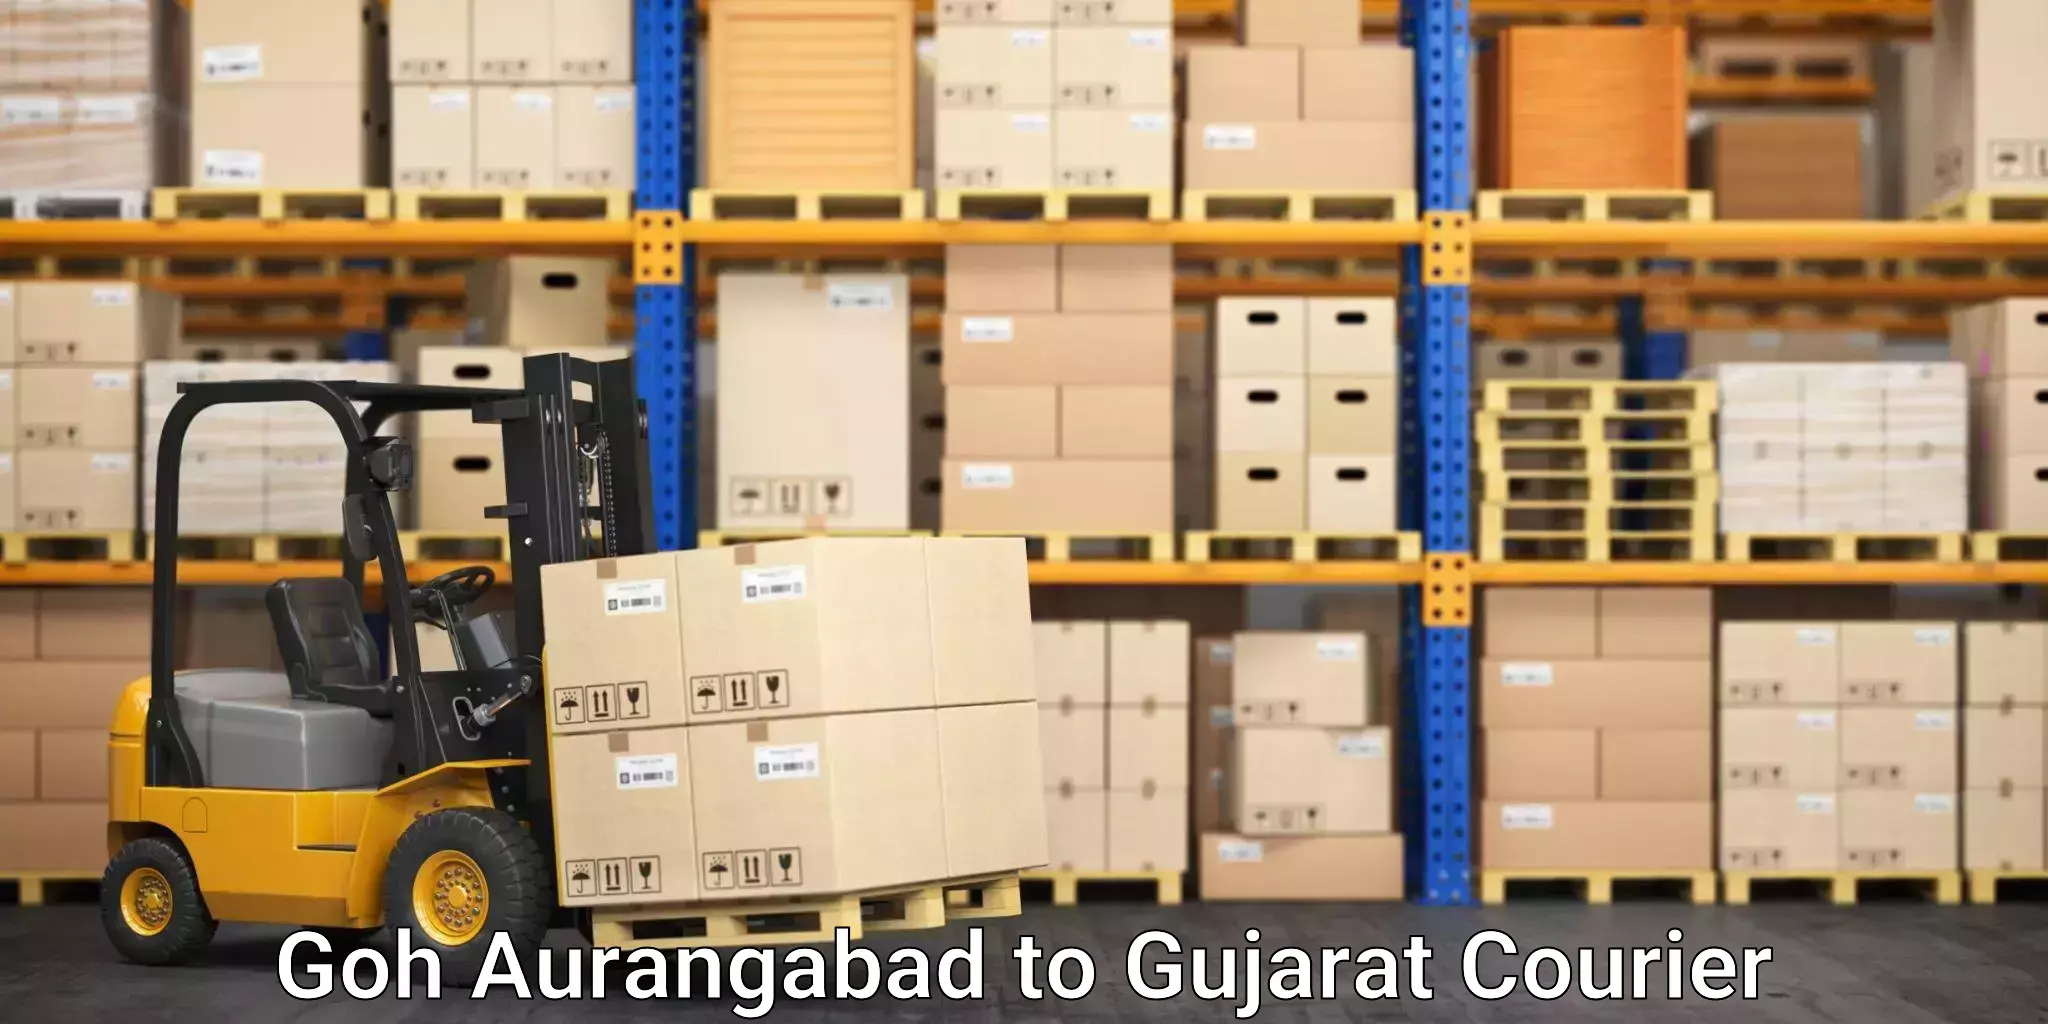 Moving and storage services in Goh Aurangabad to Dhrol